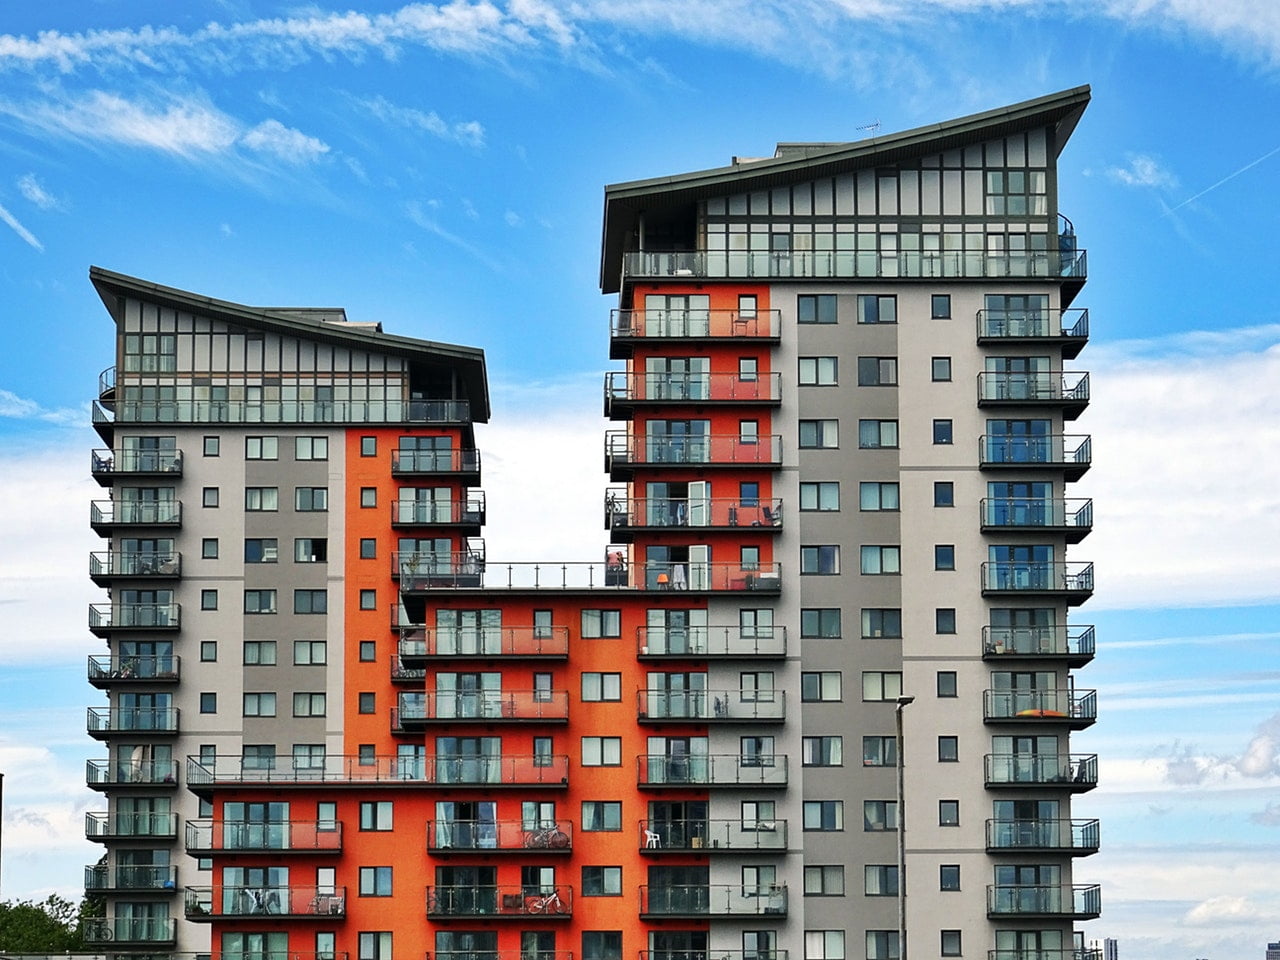 A Landlord’s Guide: Easy Things You Can Do to Improve Your Building